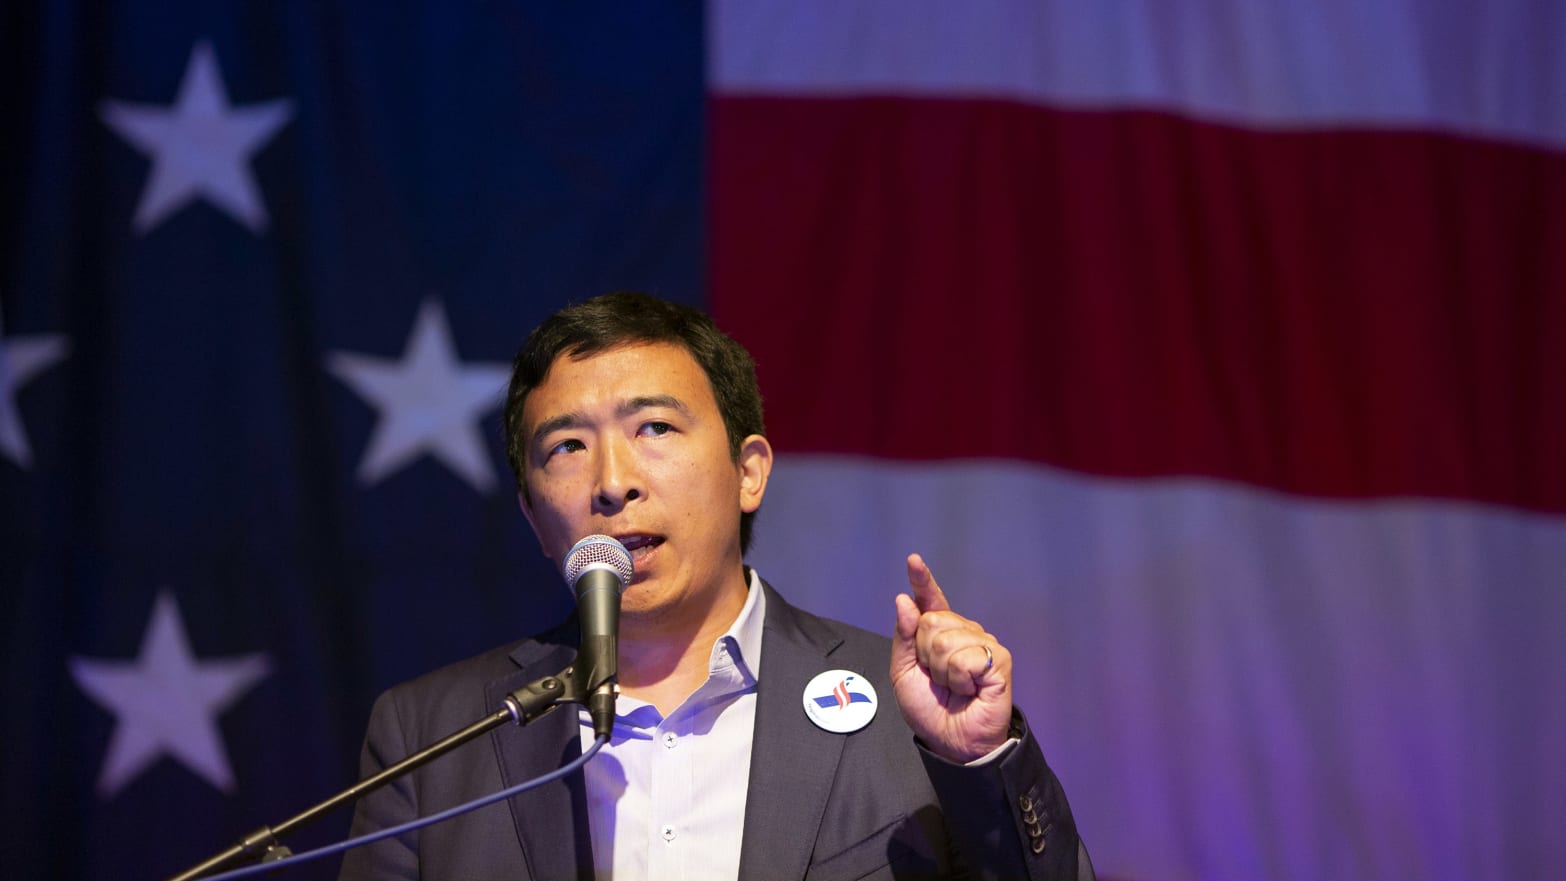 Andrew Yang’s 2020 Campaign Raised $1.7 Million in the First Quarter1566 x 881